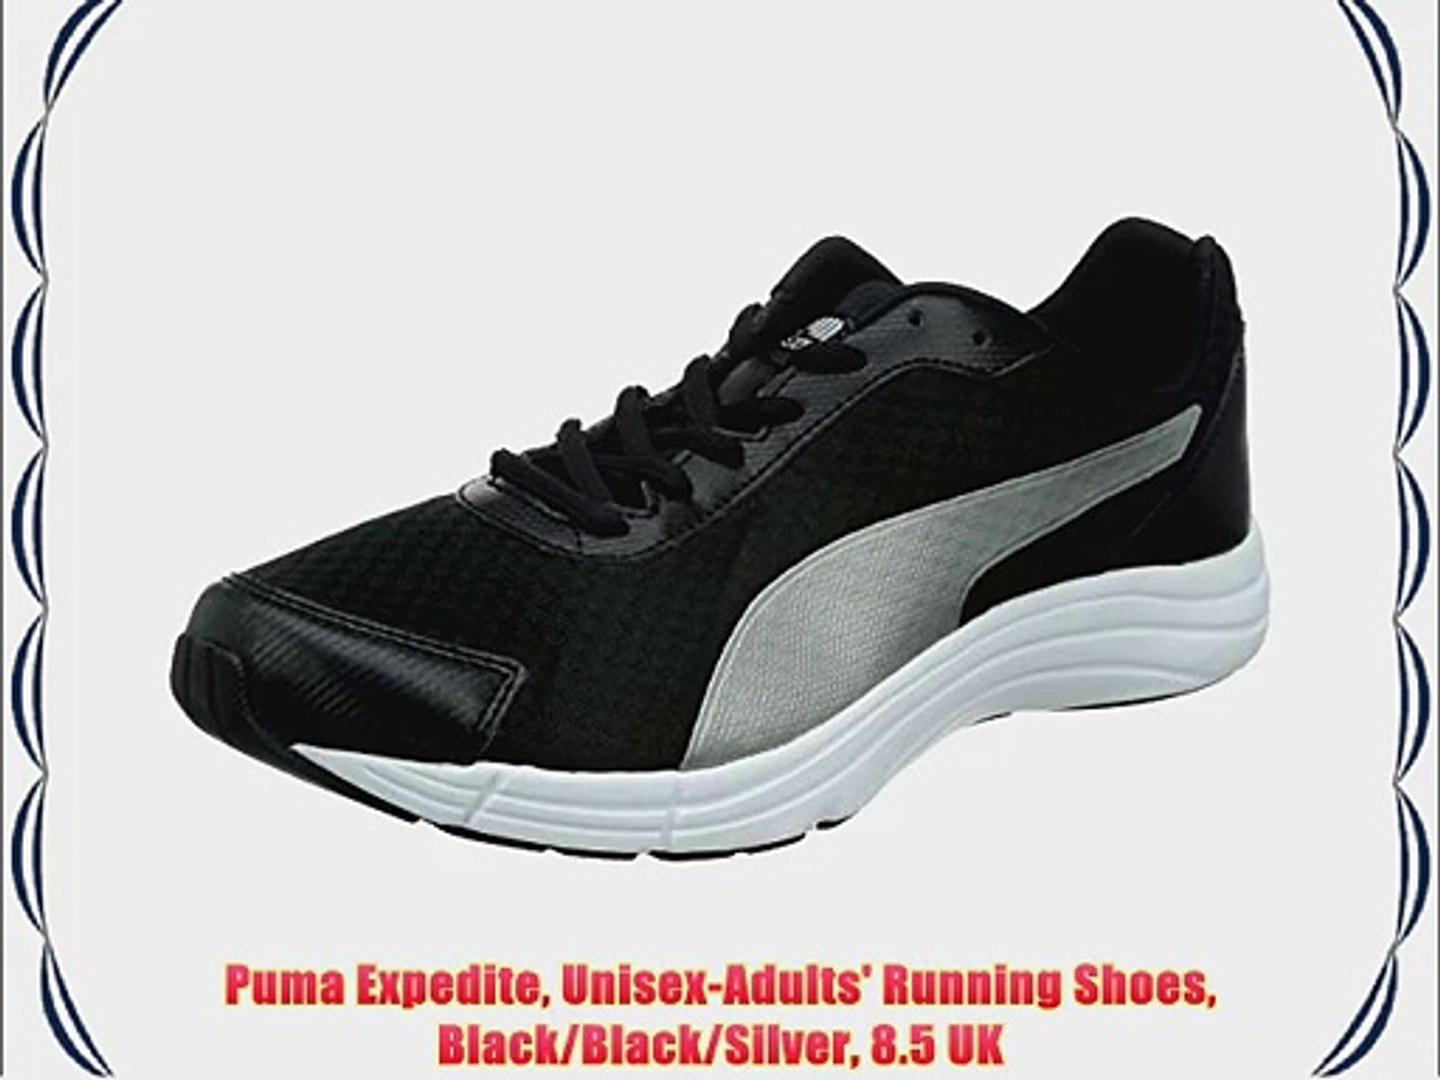 Puma Expedite Unisex-Adults' Running Shoes Black/Black/Silver 8.5 UK -  video Dailymotion